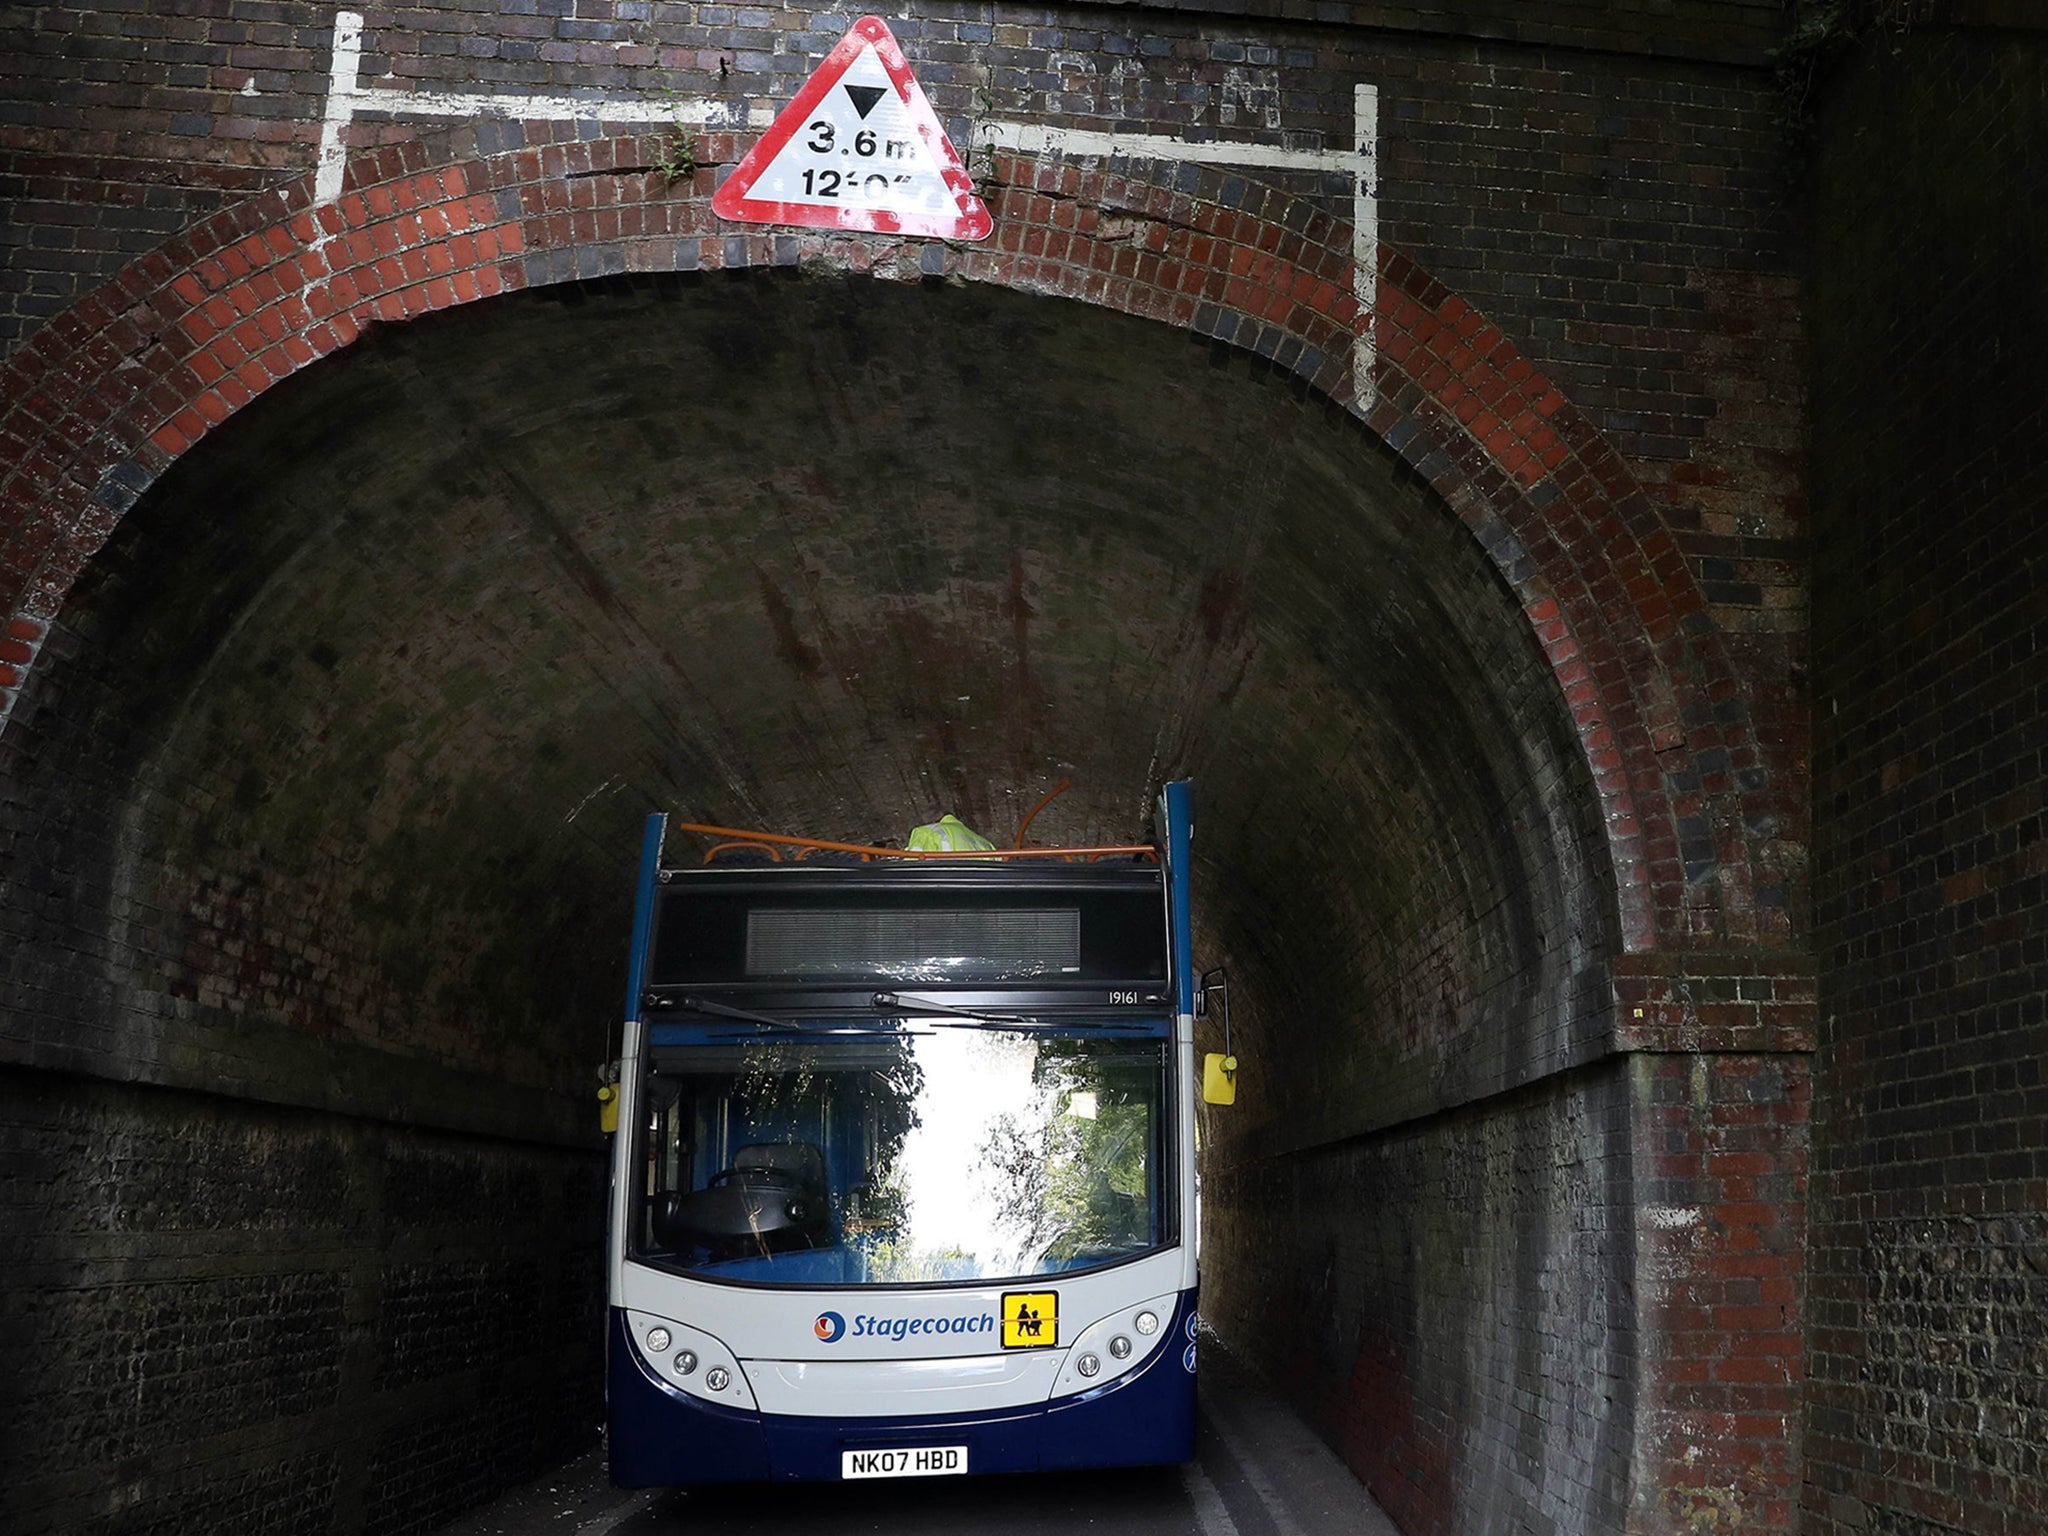 Bus roof was torn off in collision with railway bridge